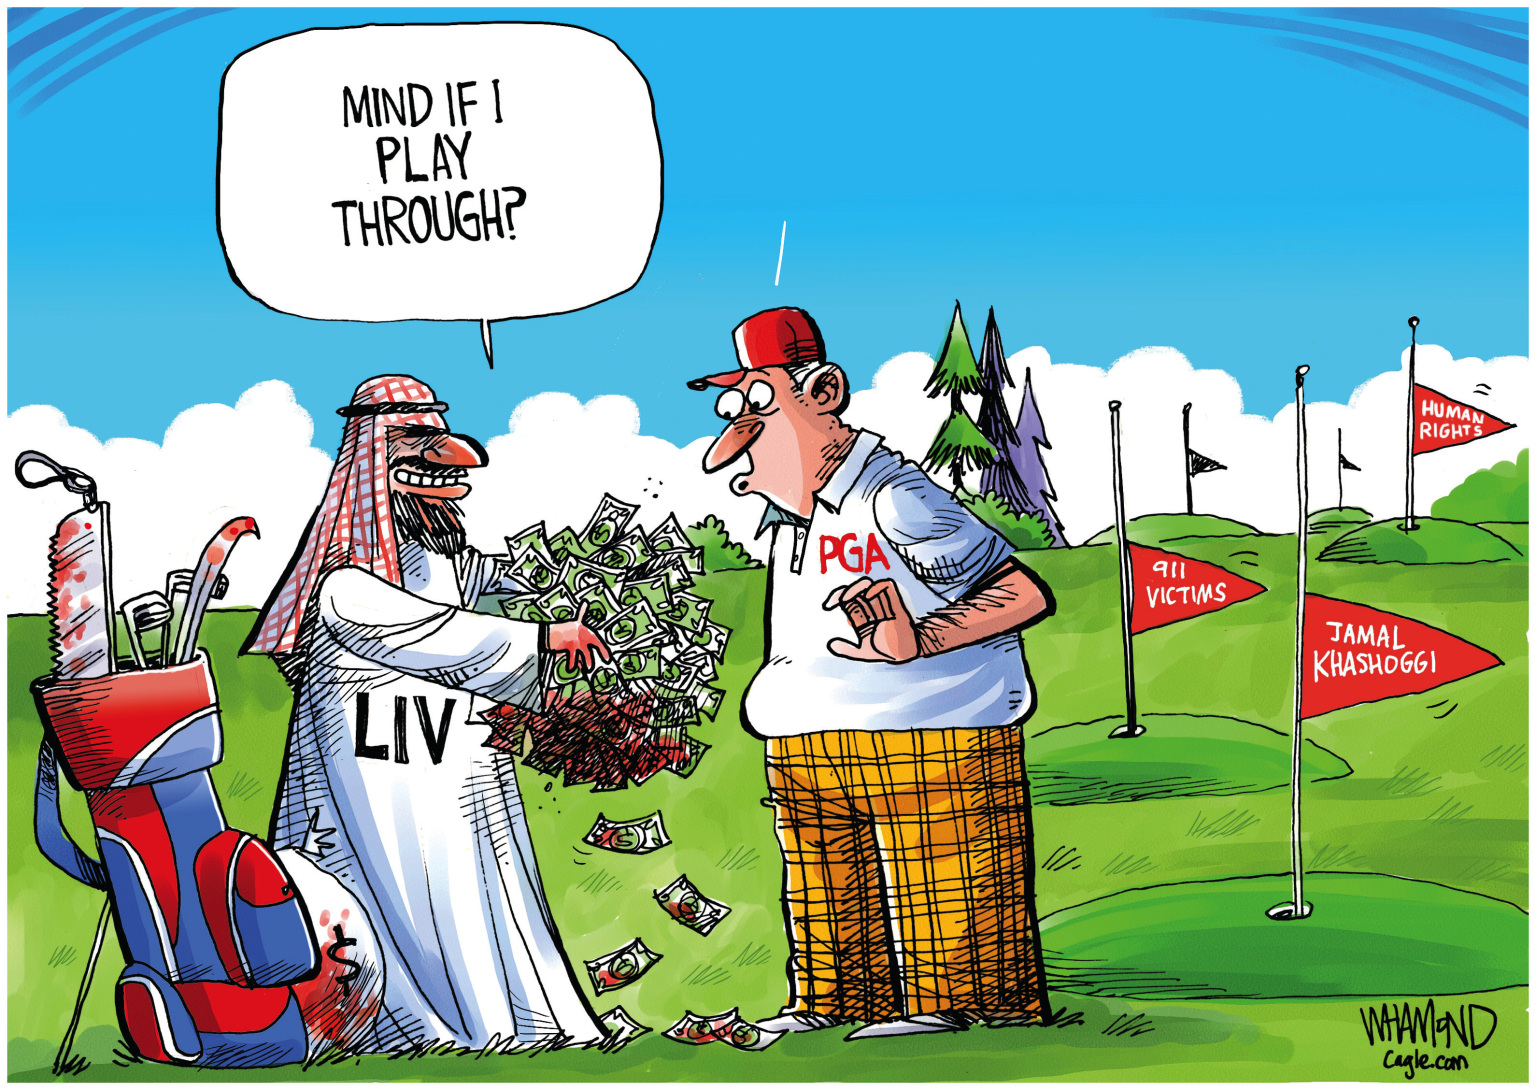 PGA Tour Merges With Saudi-Backed LIV - By Dave Whamond